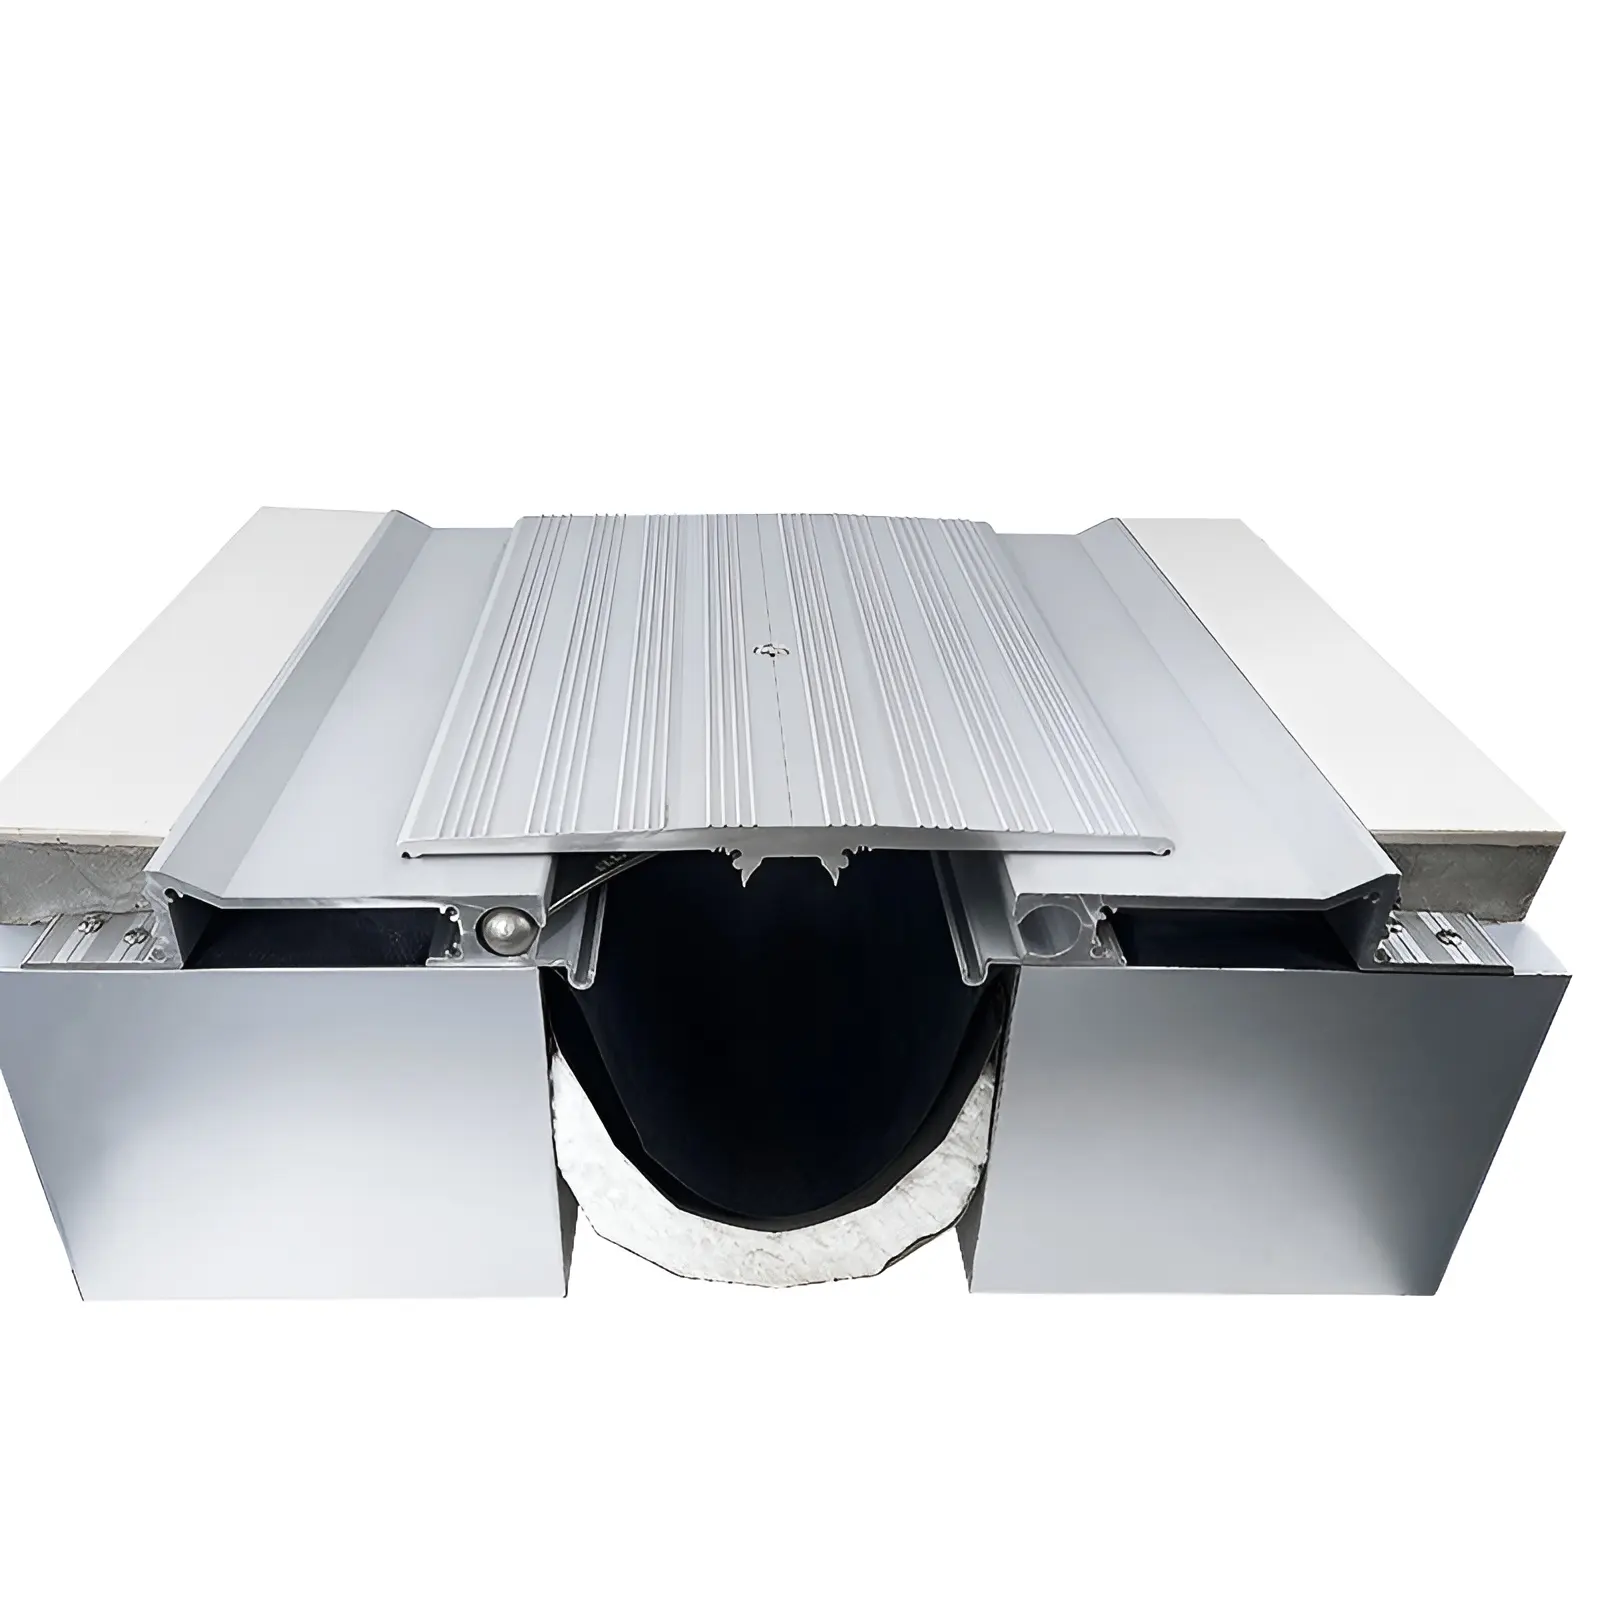 Structural Floor Joint Cover Driveway Aluminum Expansion Joint Heavy Traffic Floor Construction Joint